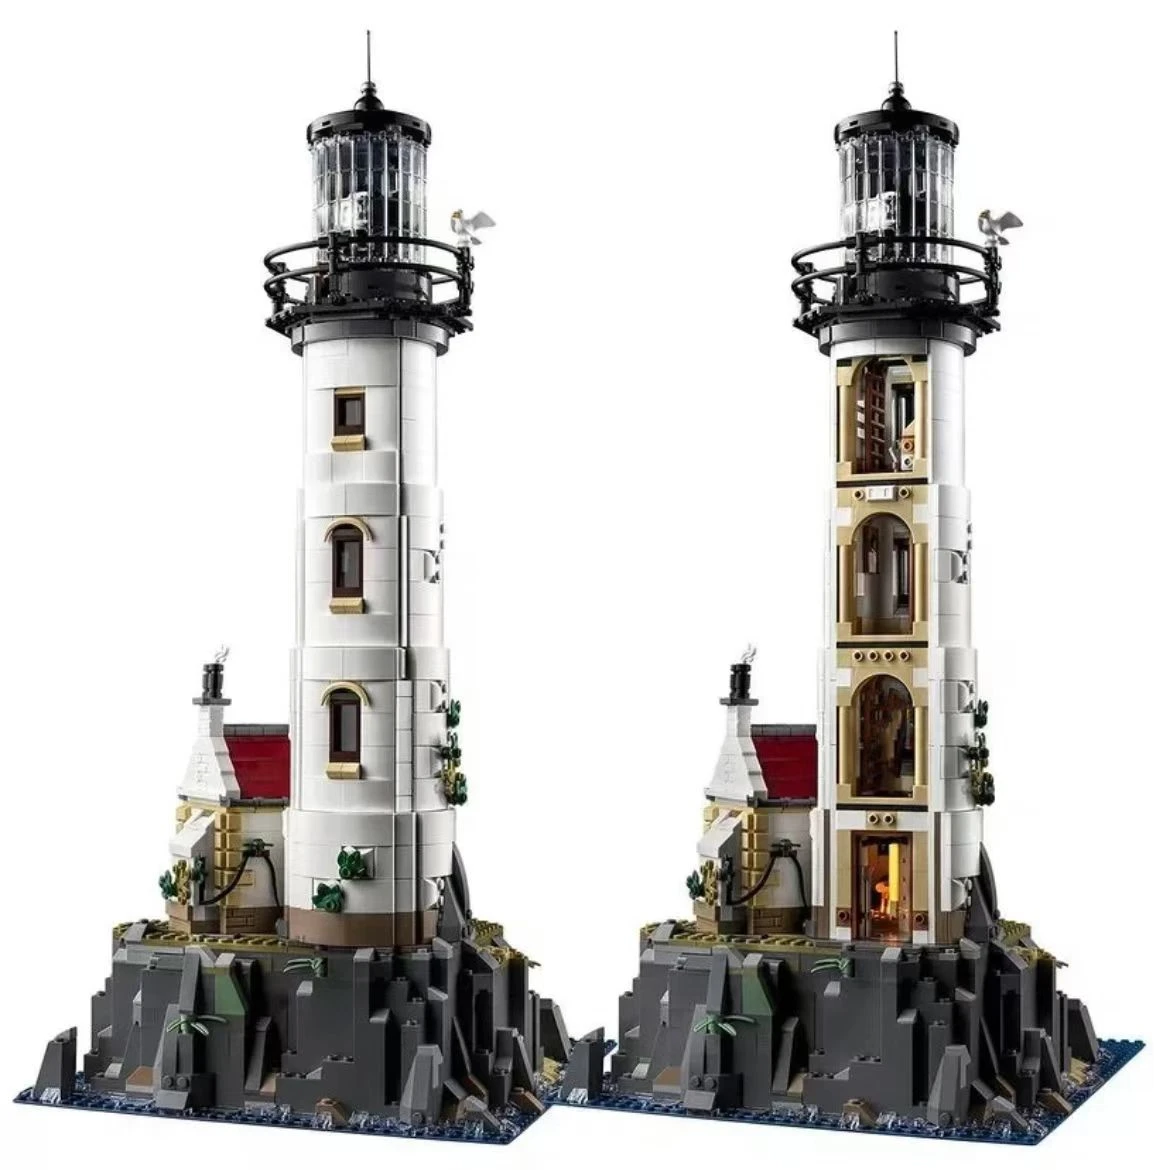 2022 New Electric Lighthouse 21335 2065pcs Model Building Block Motorised Bricks Assembly Toys For Children Christmas Gifts